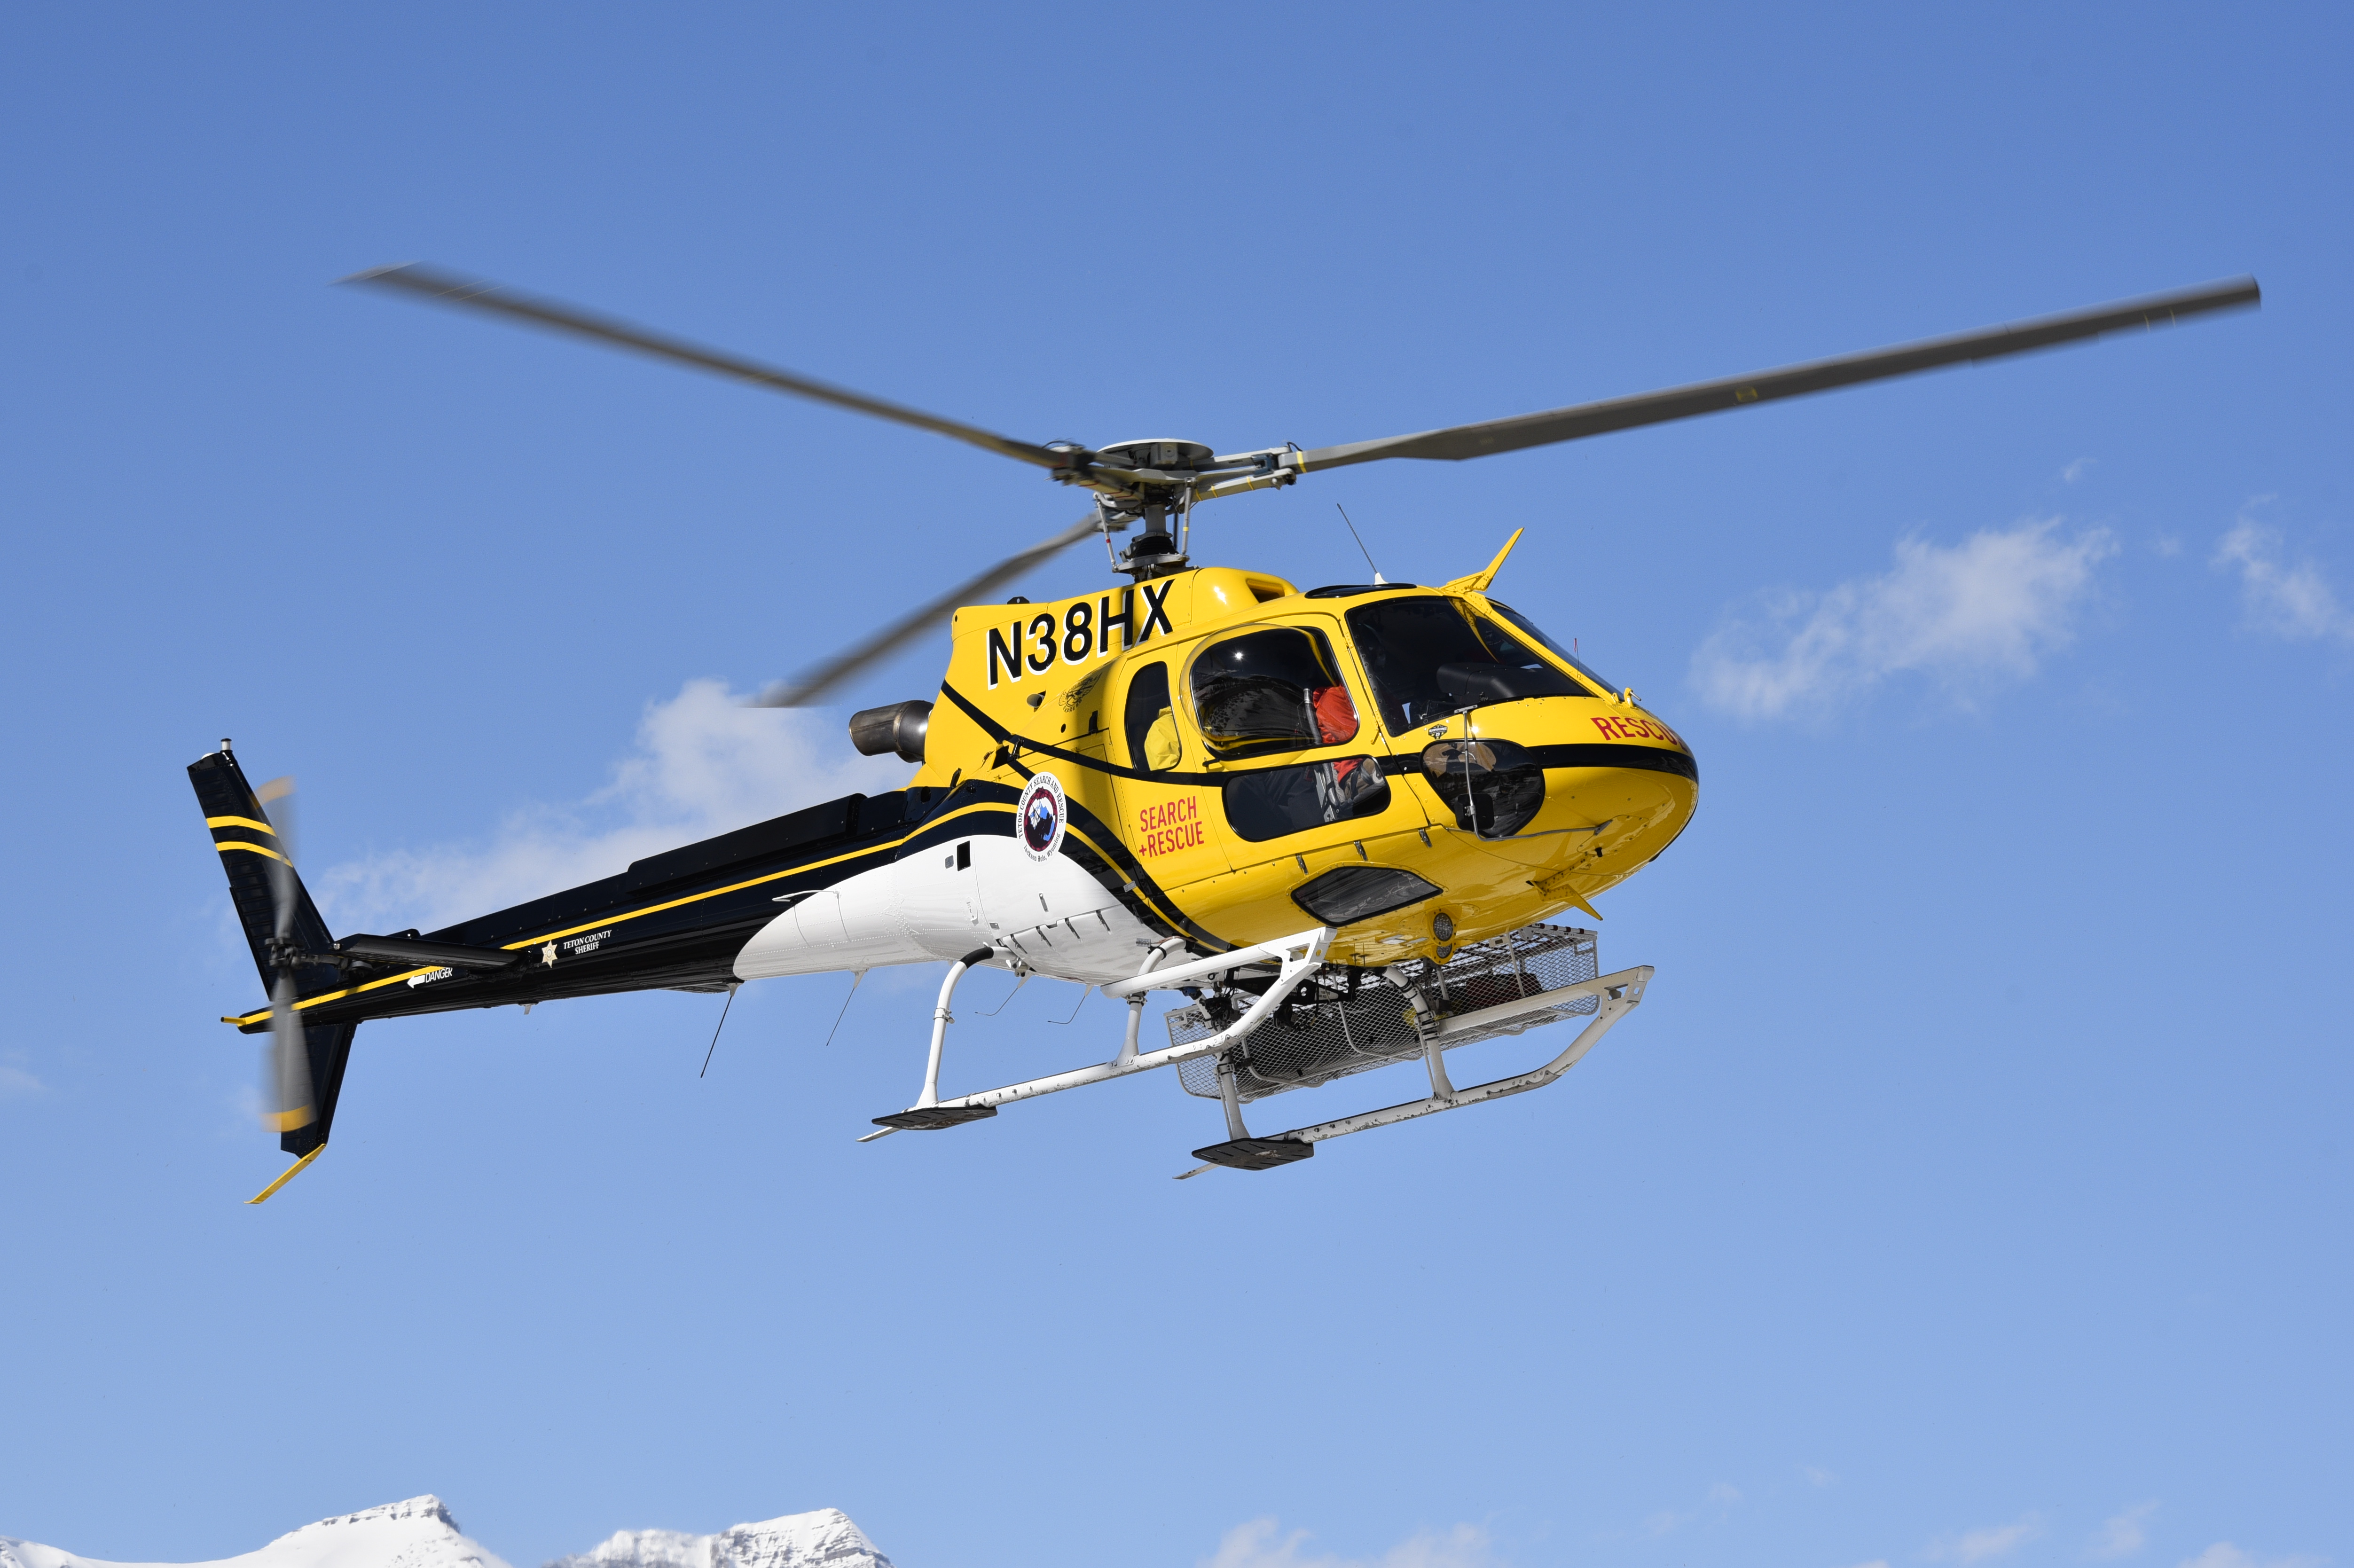 Teton County Search and Rescue Helicopter in flight